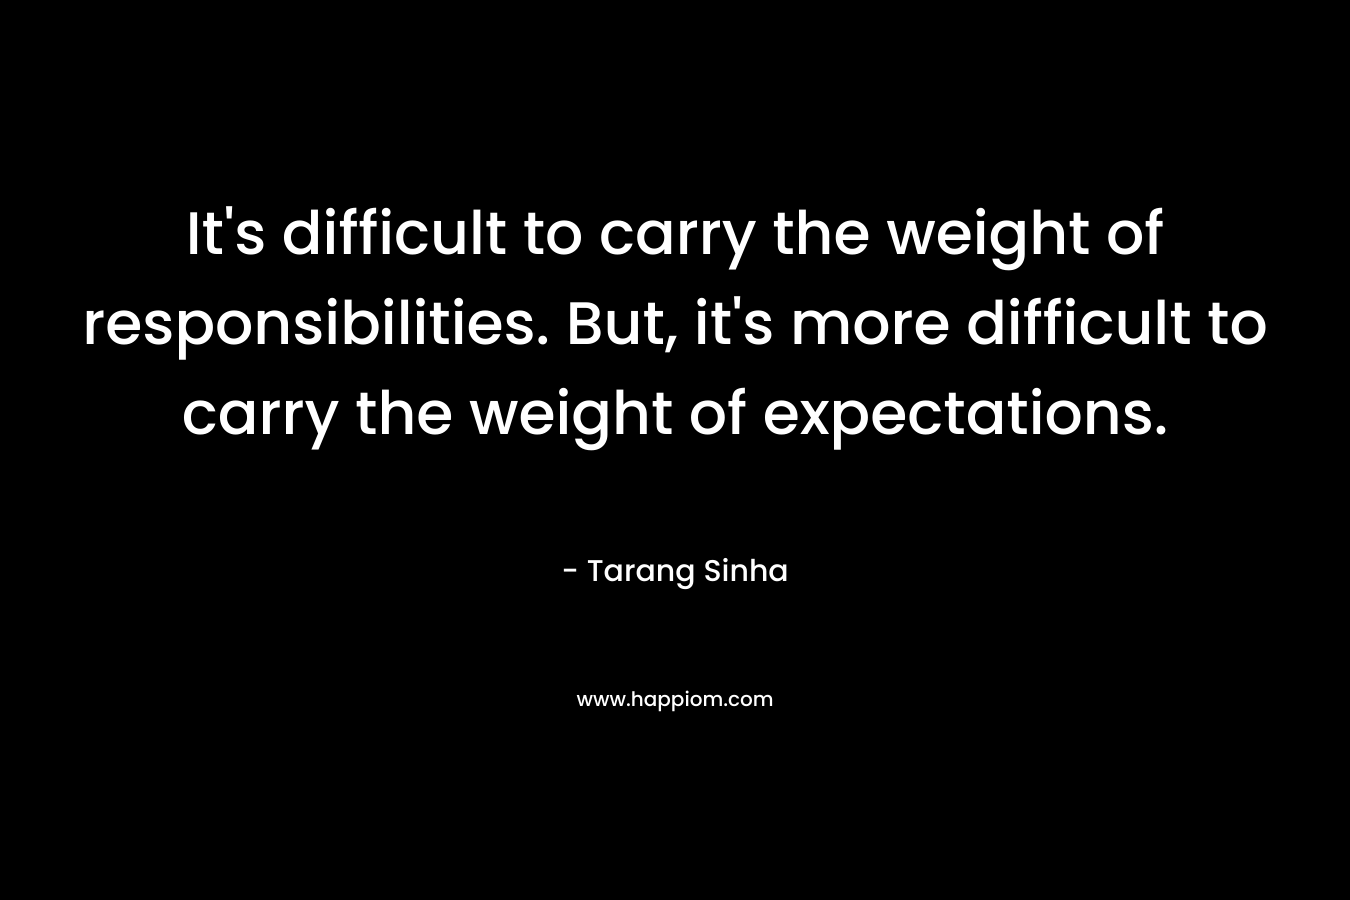 It's difficult to carry the weight of responsibilities. But, it's more difficult to carry the weight of expectations.